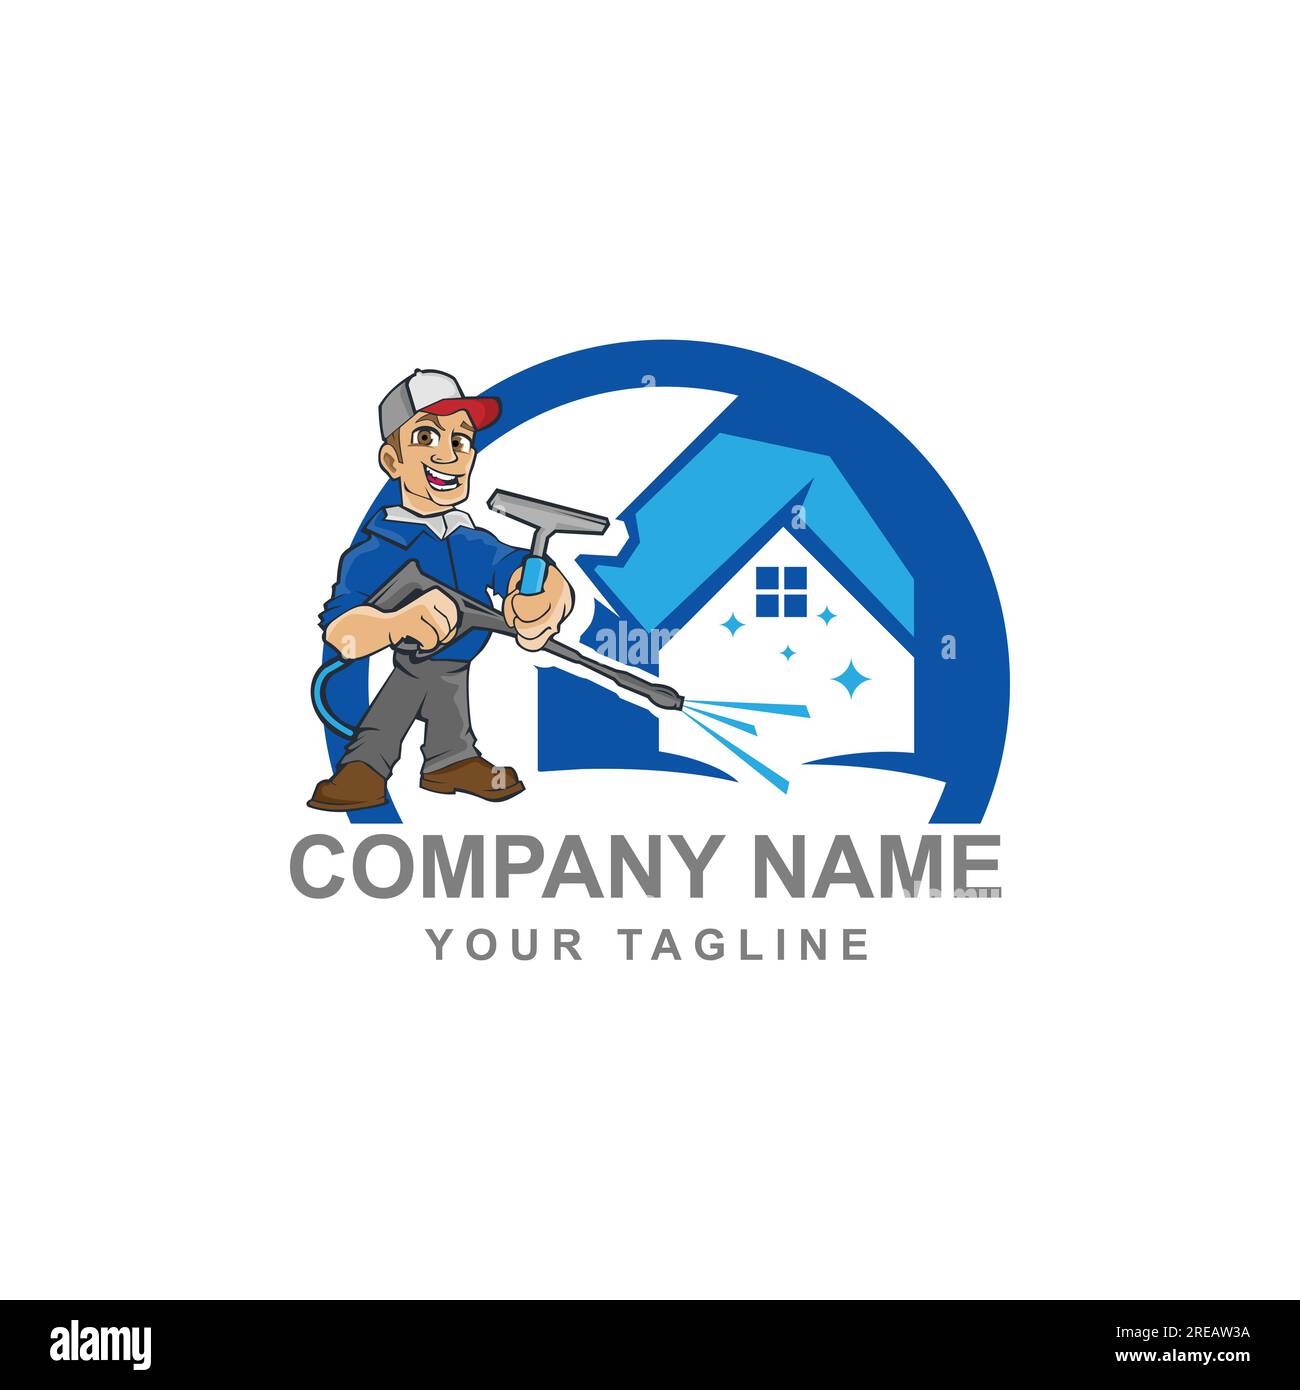 home Cleaning service character mascot in modern style, good for cleaning service business logo.EPS 10 Stock Vector